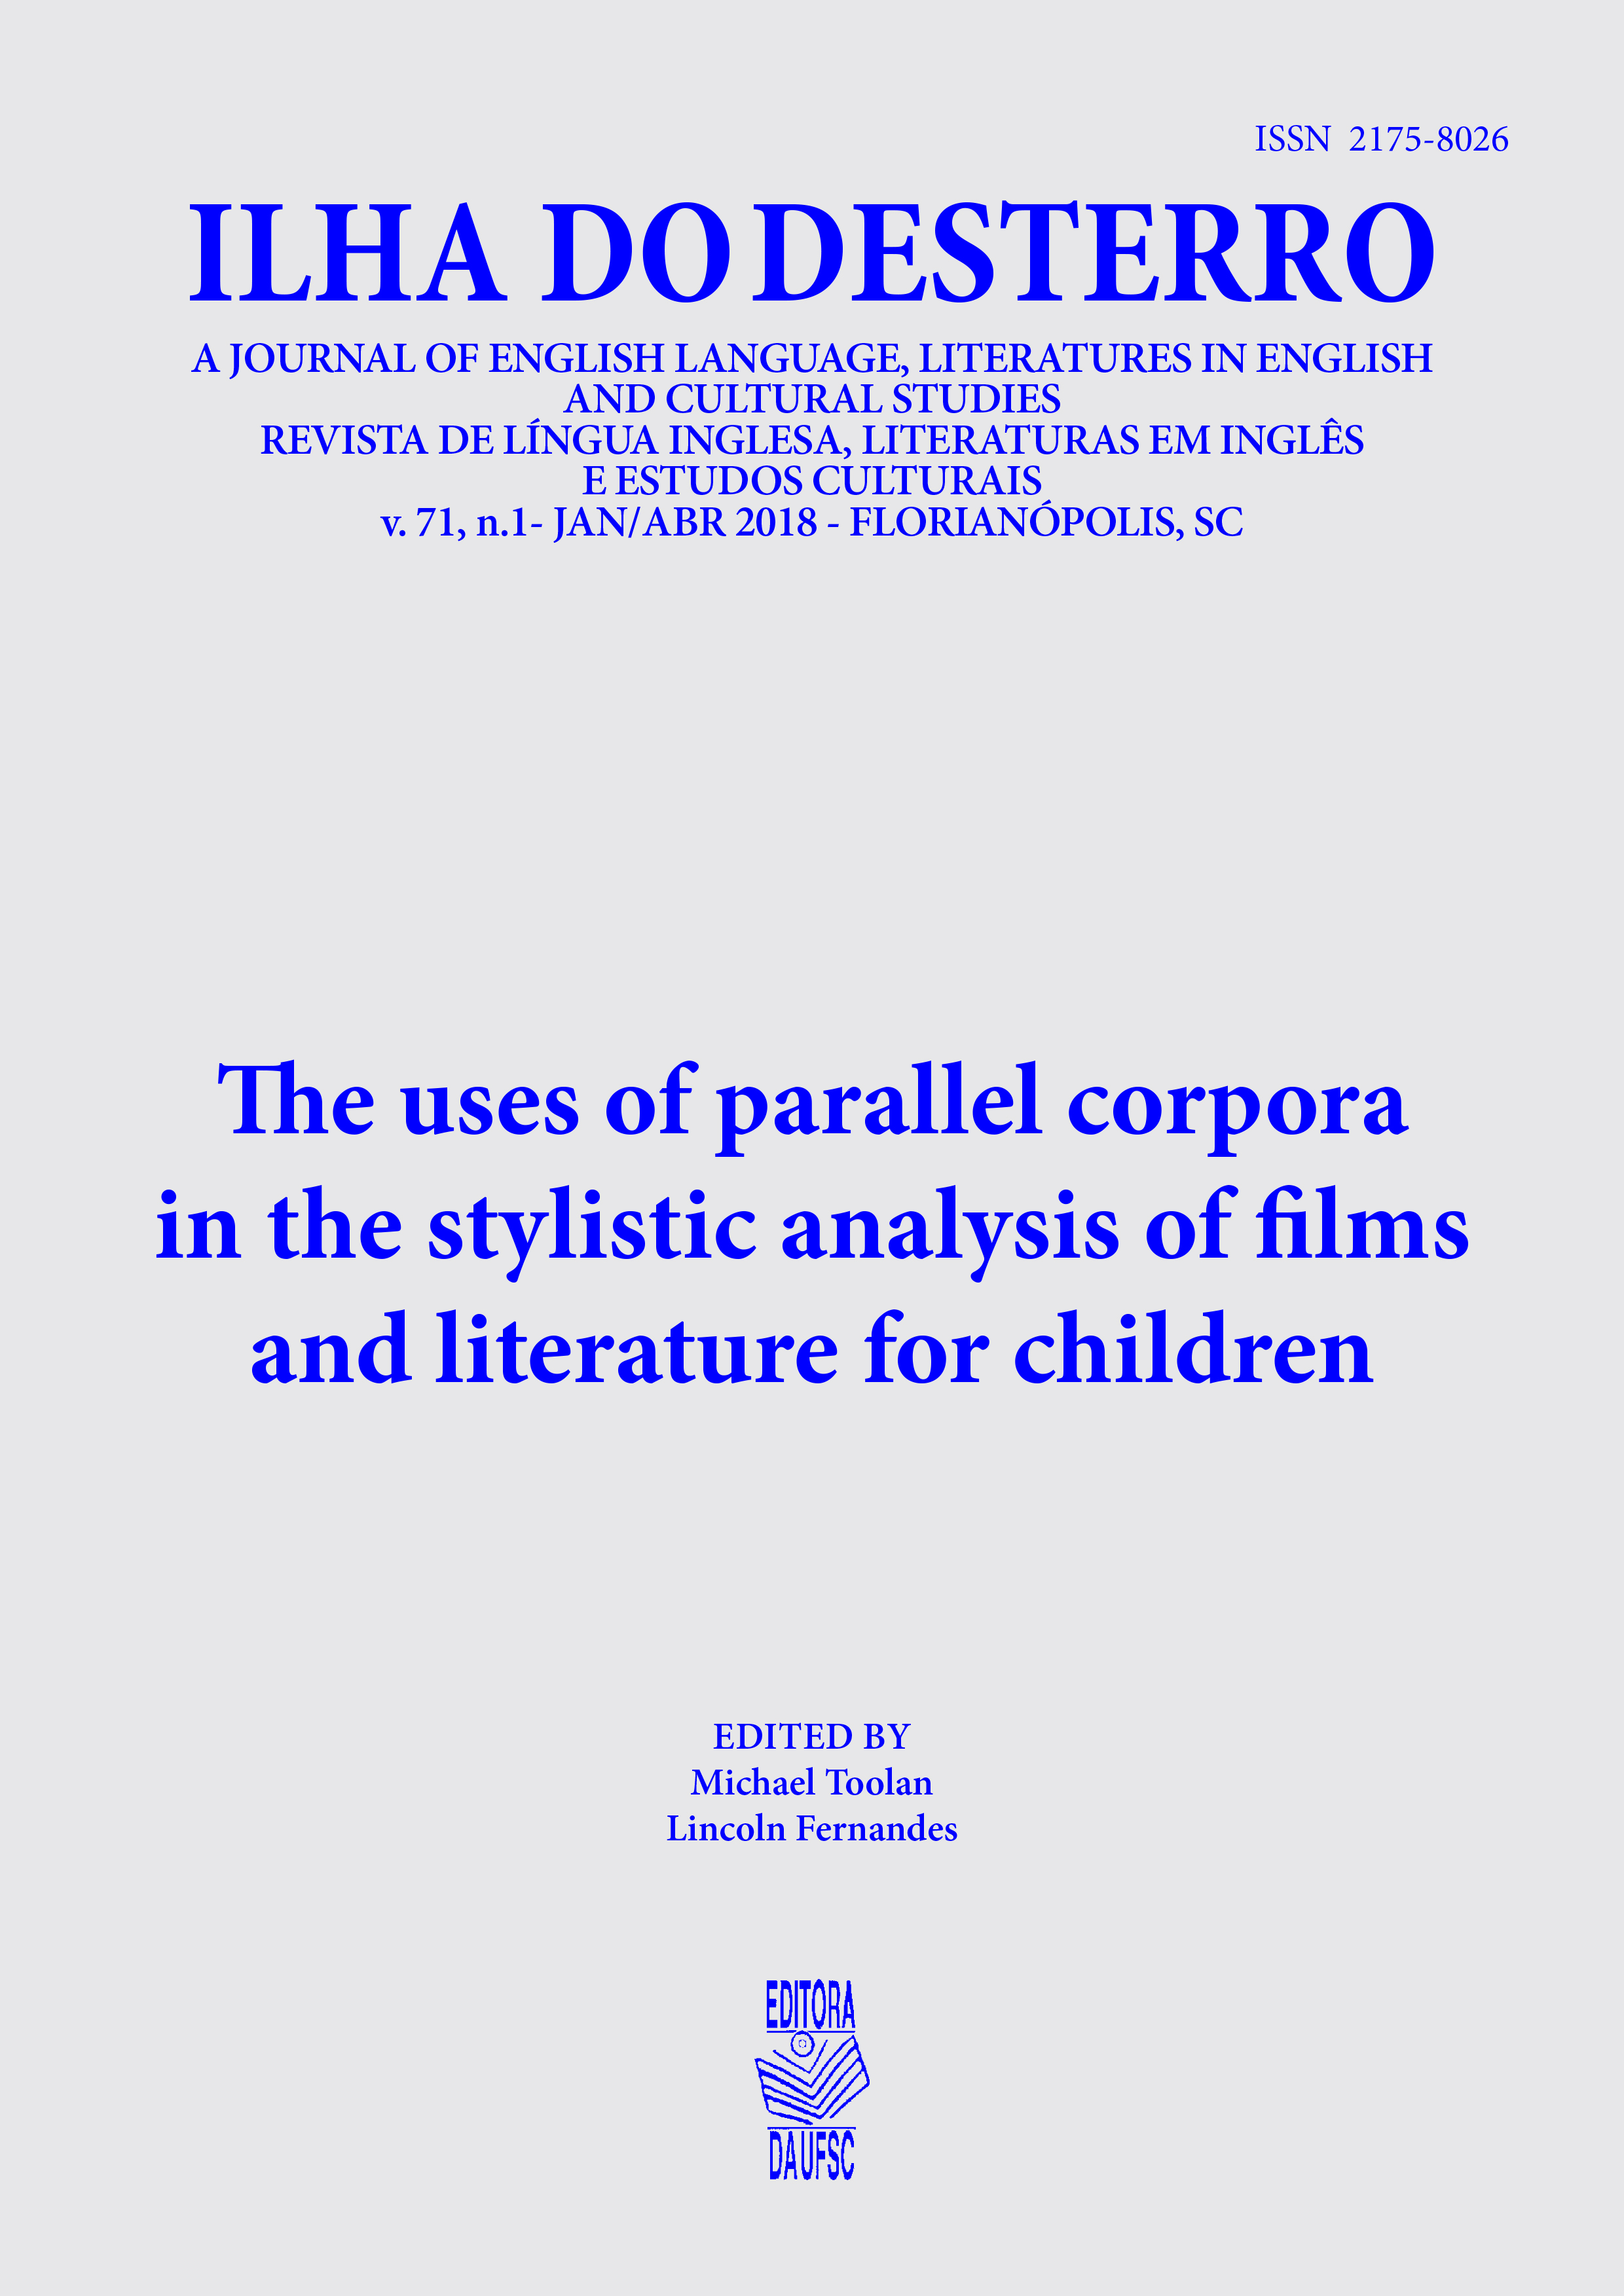 					Visualizar v. 71 n. 1 (2018): The uses of parallel corpora in the stylistic analysis of films and literature for children
				